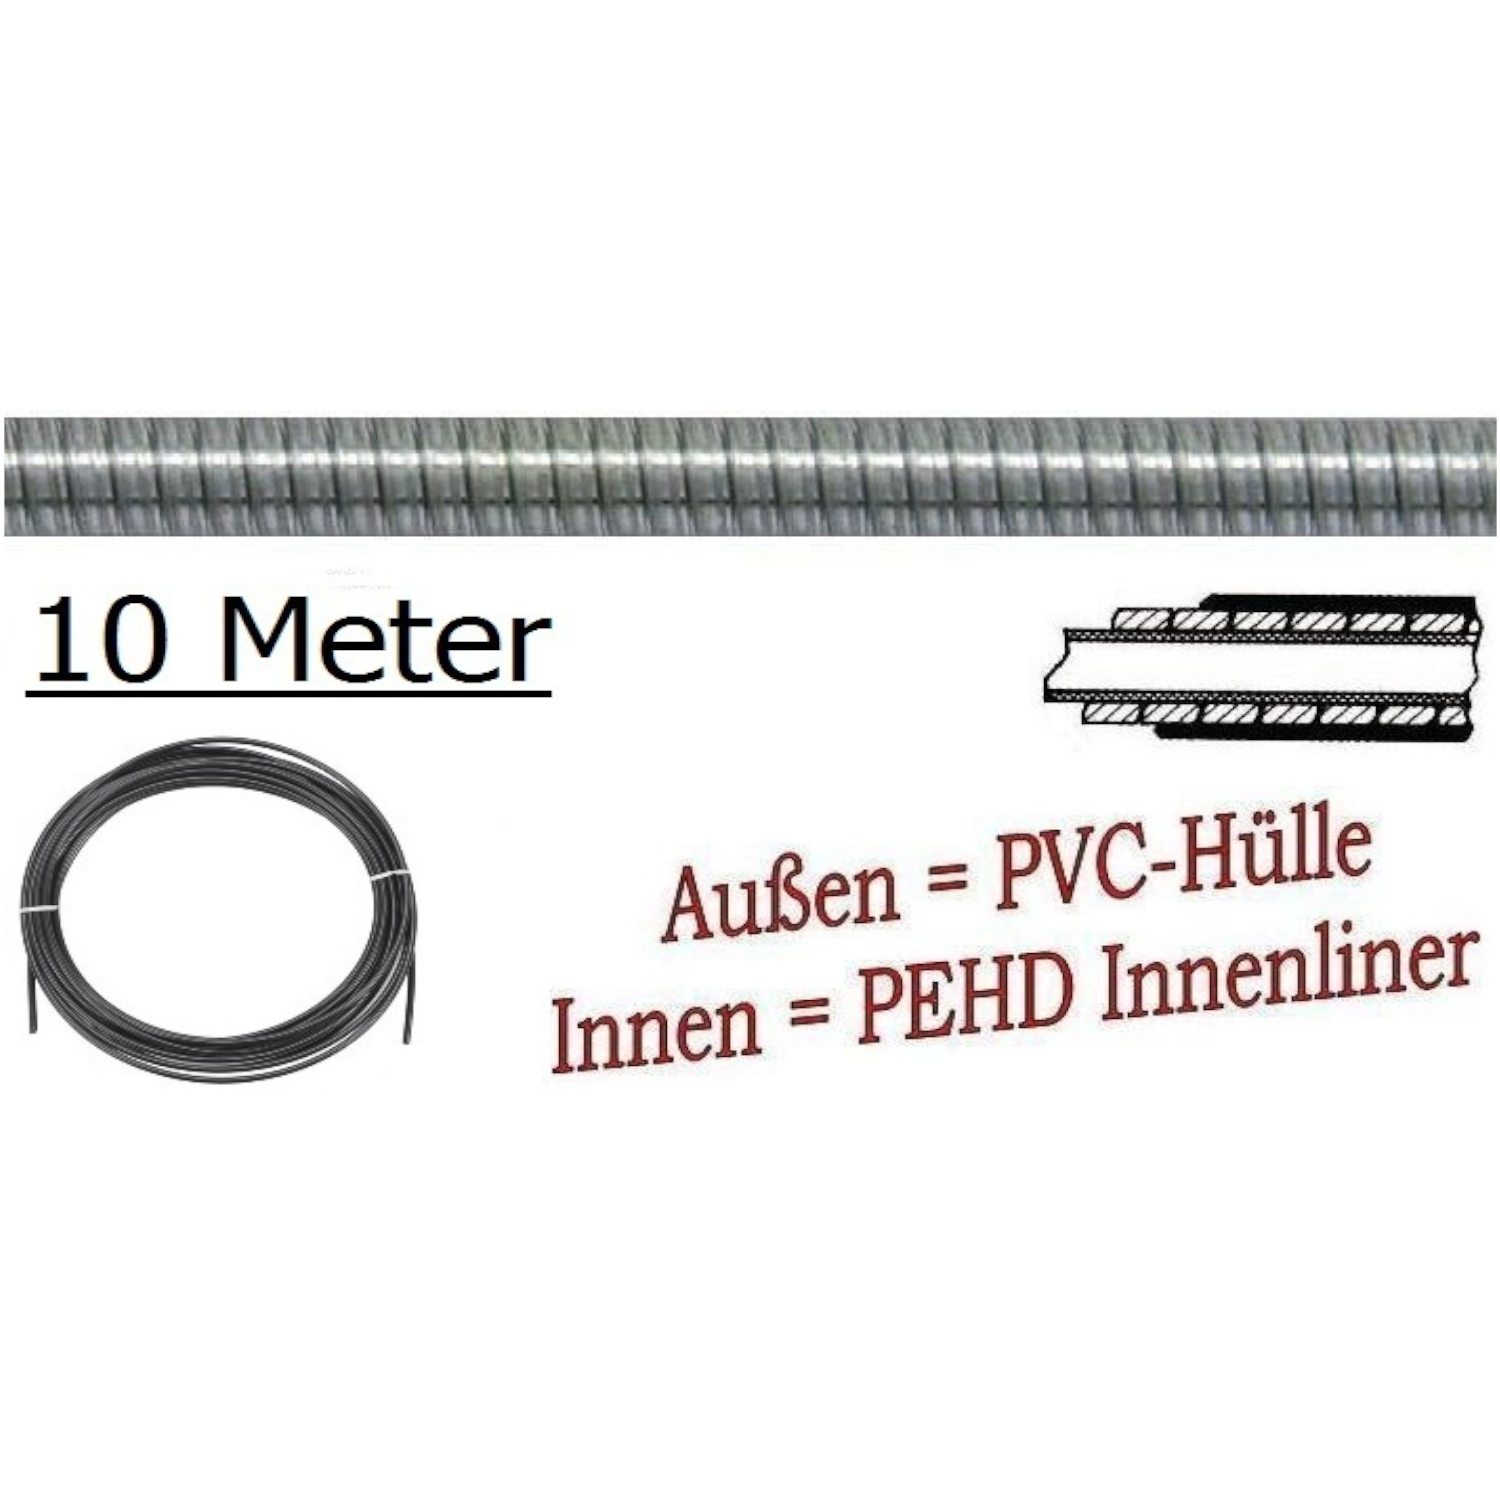 BREMS-Hülle 10 m-Rolle-DT11350010 in transparent, mit PE-HD-Innenliner